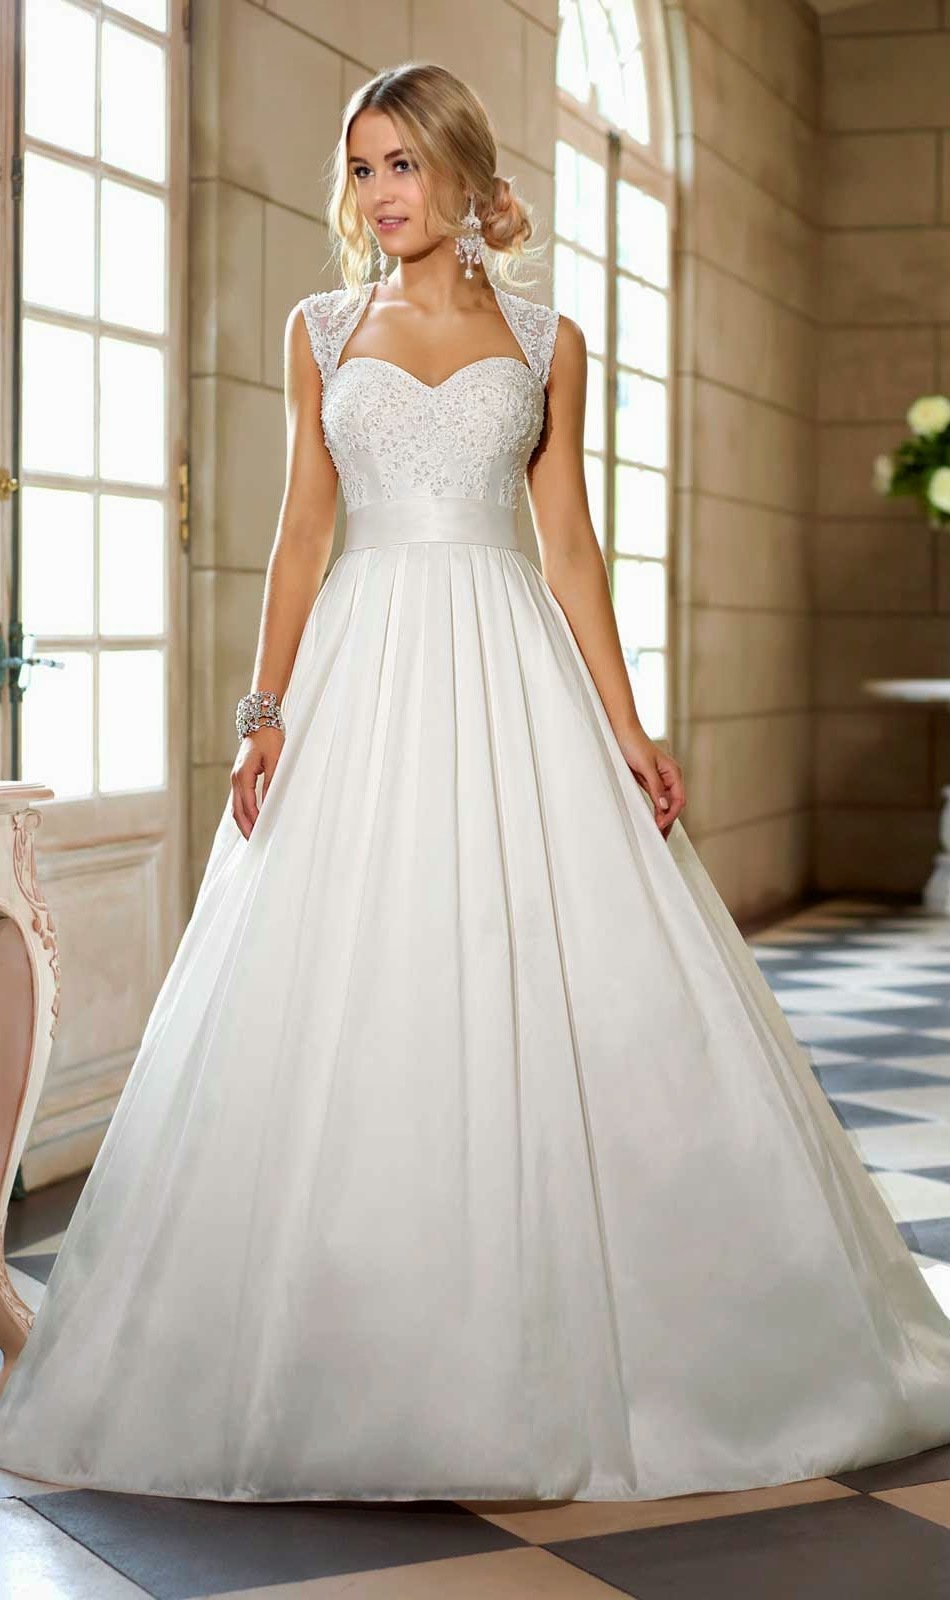 White Wedding Dresses with Bling